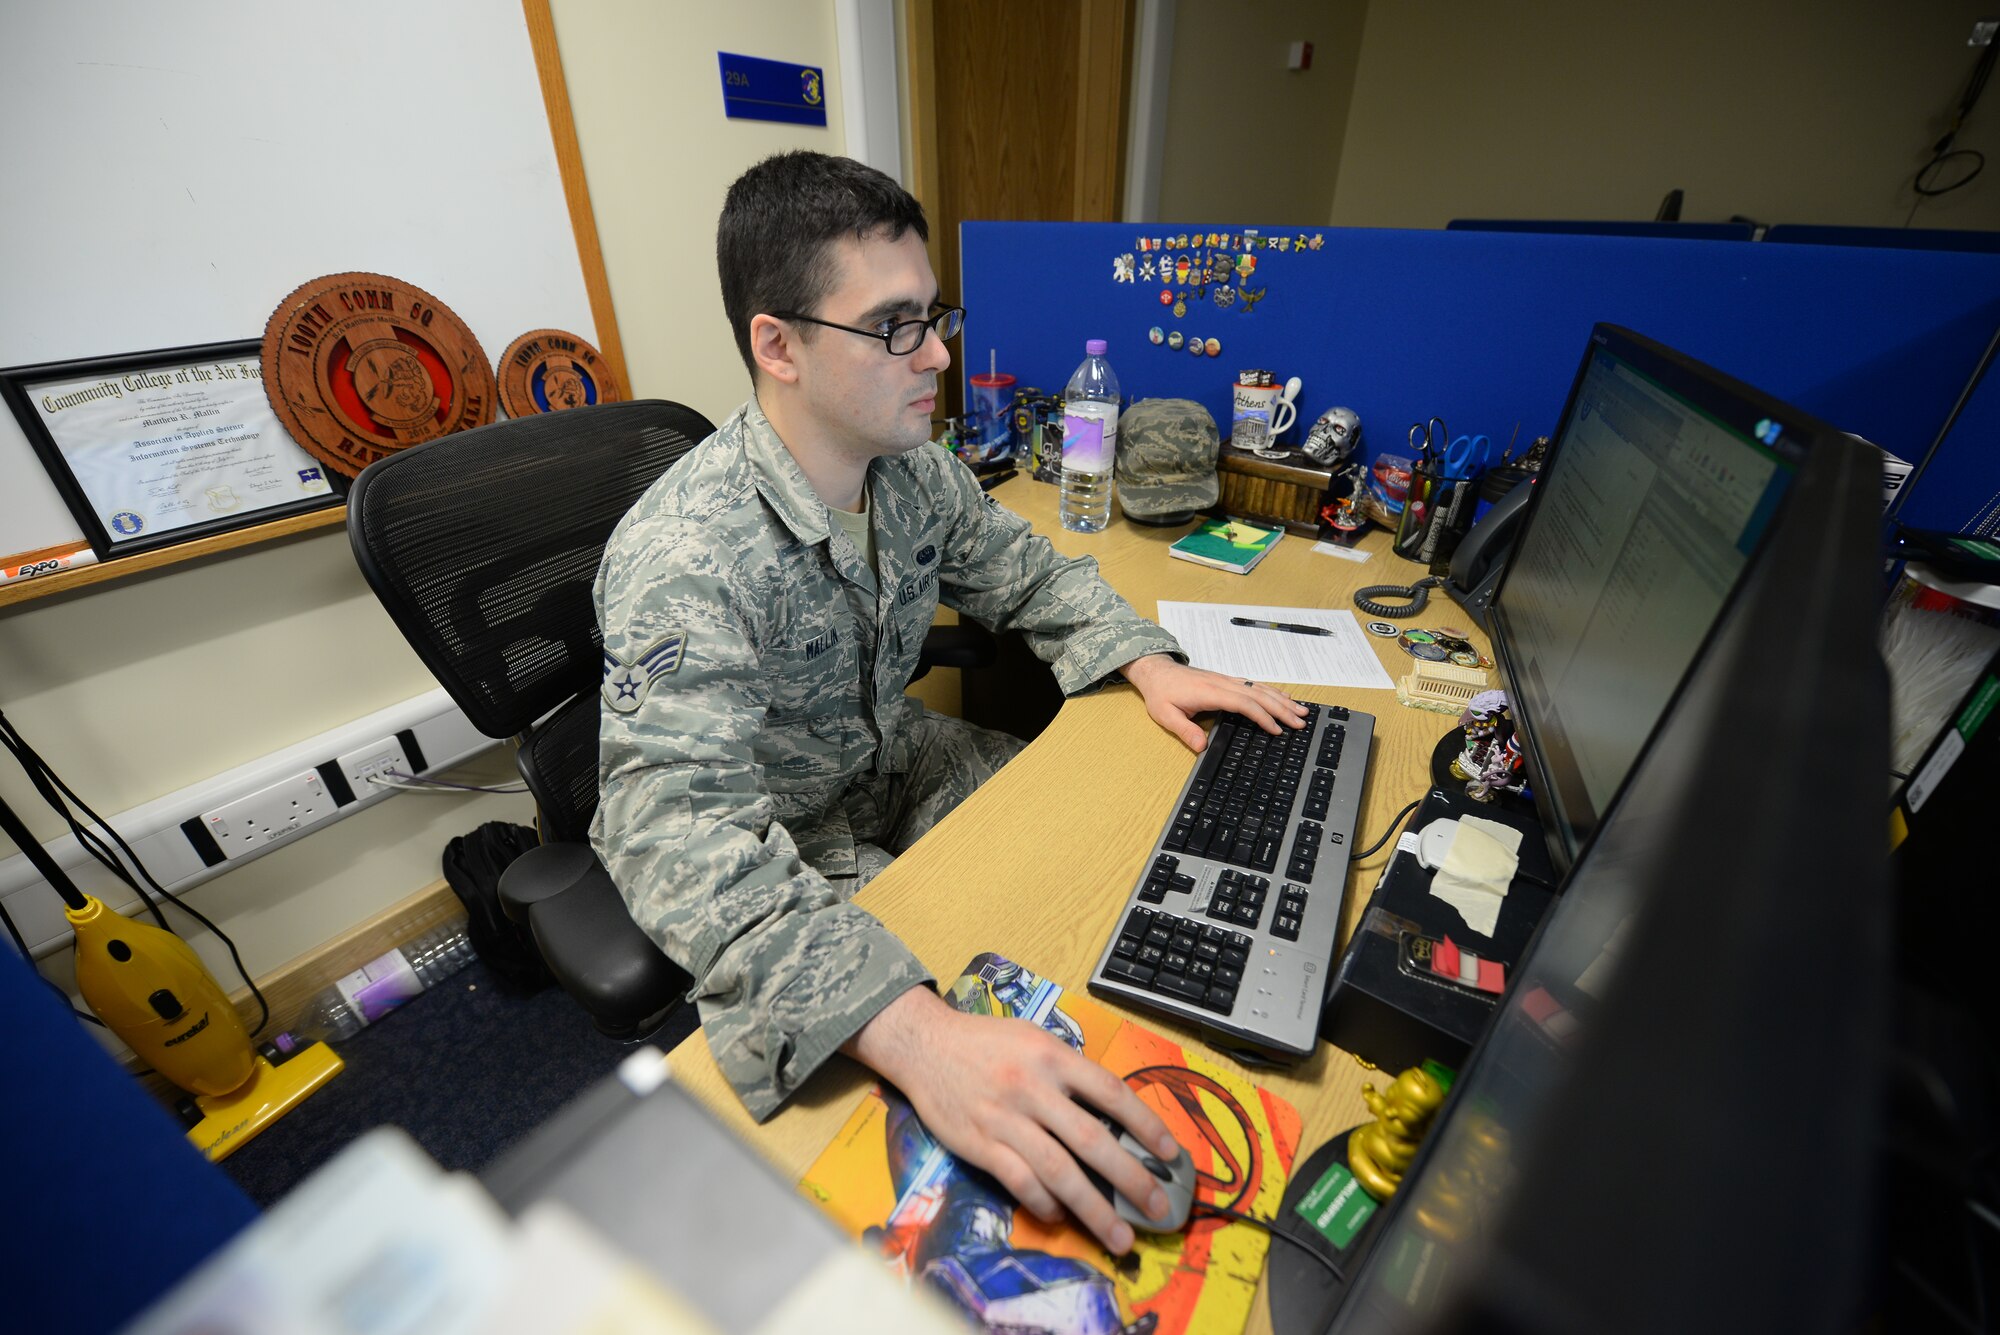 U.S. Air Force Senior Airman Matthew Mallin, 100th Communication Squadron wing cyber security technician, works on his computer Feb. 11, 2016 on RAF Mildenhall, England. Mallin and his wife Sasha Southee-Mallin, 48th Medical Support Squadron laboratory technician, provided lifesaving medical care until emergency responders arrived to a heart-attack victim Jan. 17, 2016, while on vacation in Norway. (U.S. Air Force photo by Staff Sgt. Micaiah Anthony/Released)